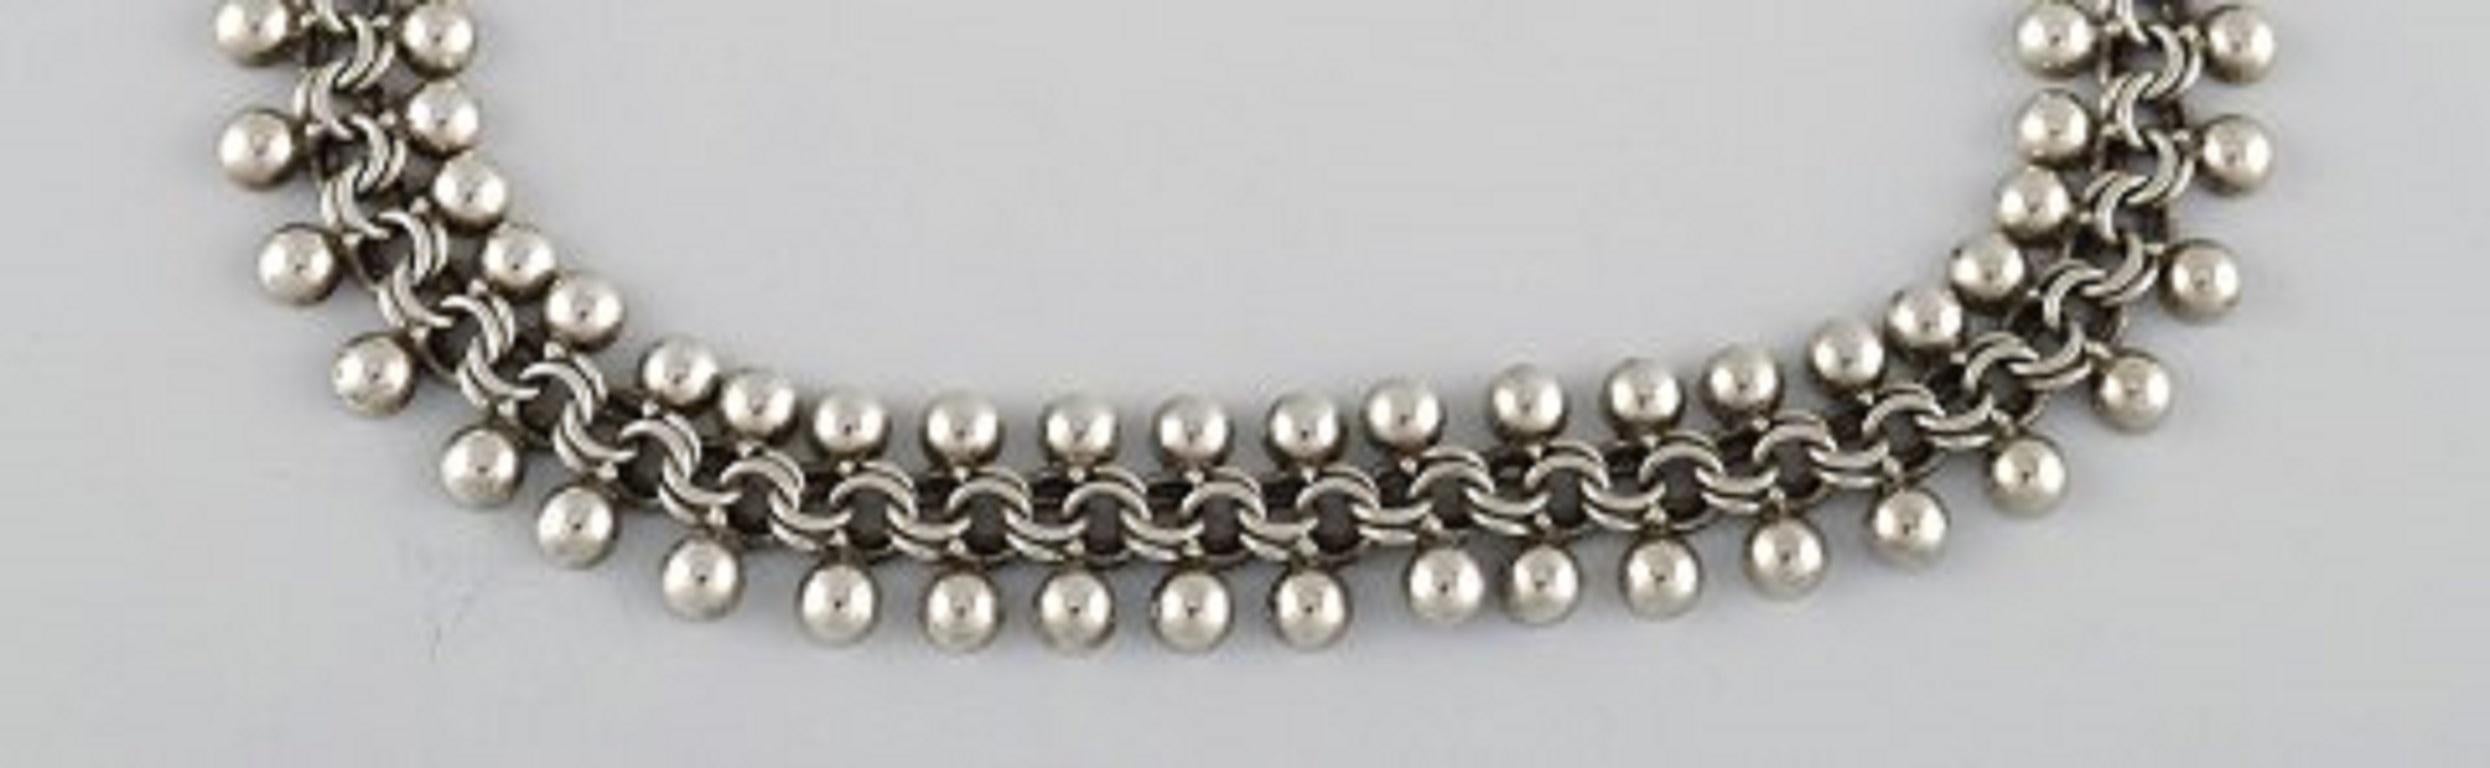 Hermann Siersbøl - Denmark. Modernist necklace in sterling silver. Danish design, mid 20th century.
Full length: 39 cm.
Width: 1.5 cm.
In excellent condition.
Unstamped.